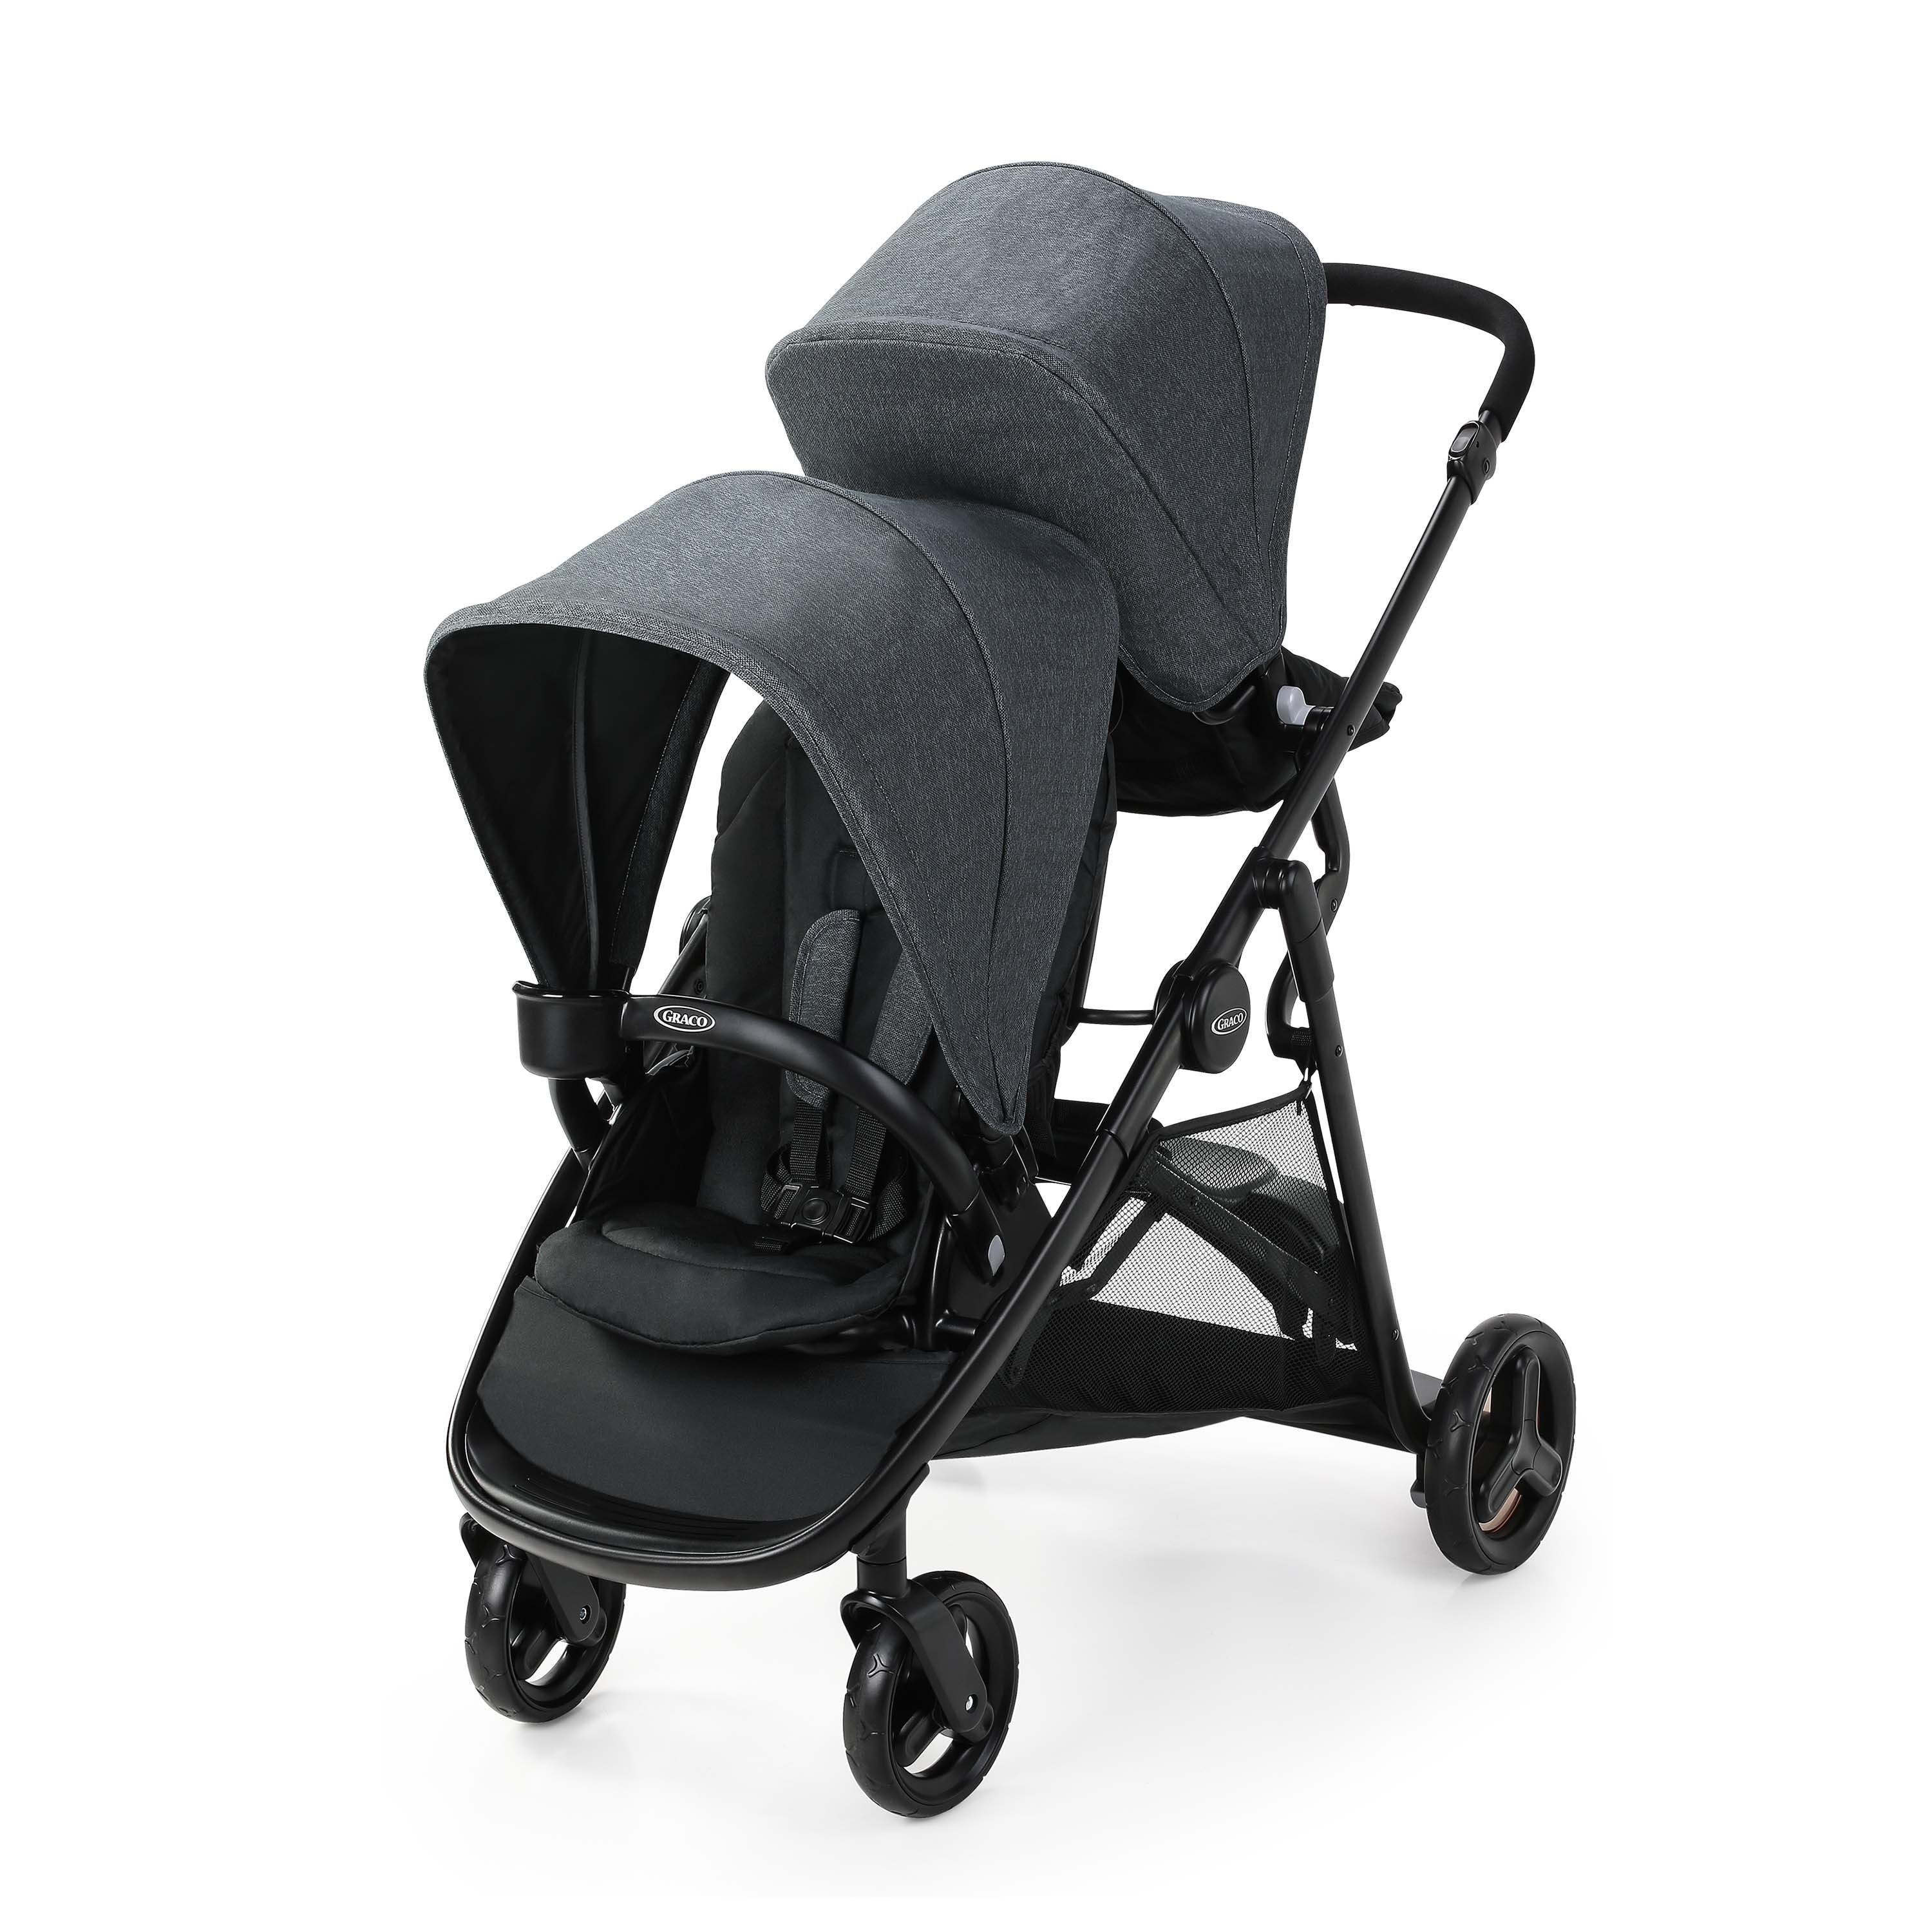 Double Stroller - Bed Bath & Beyond